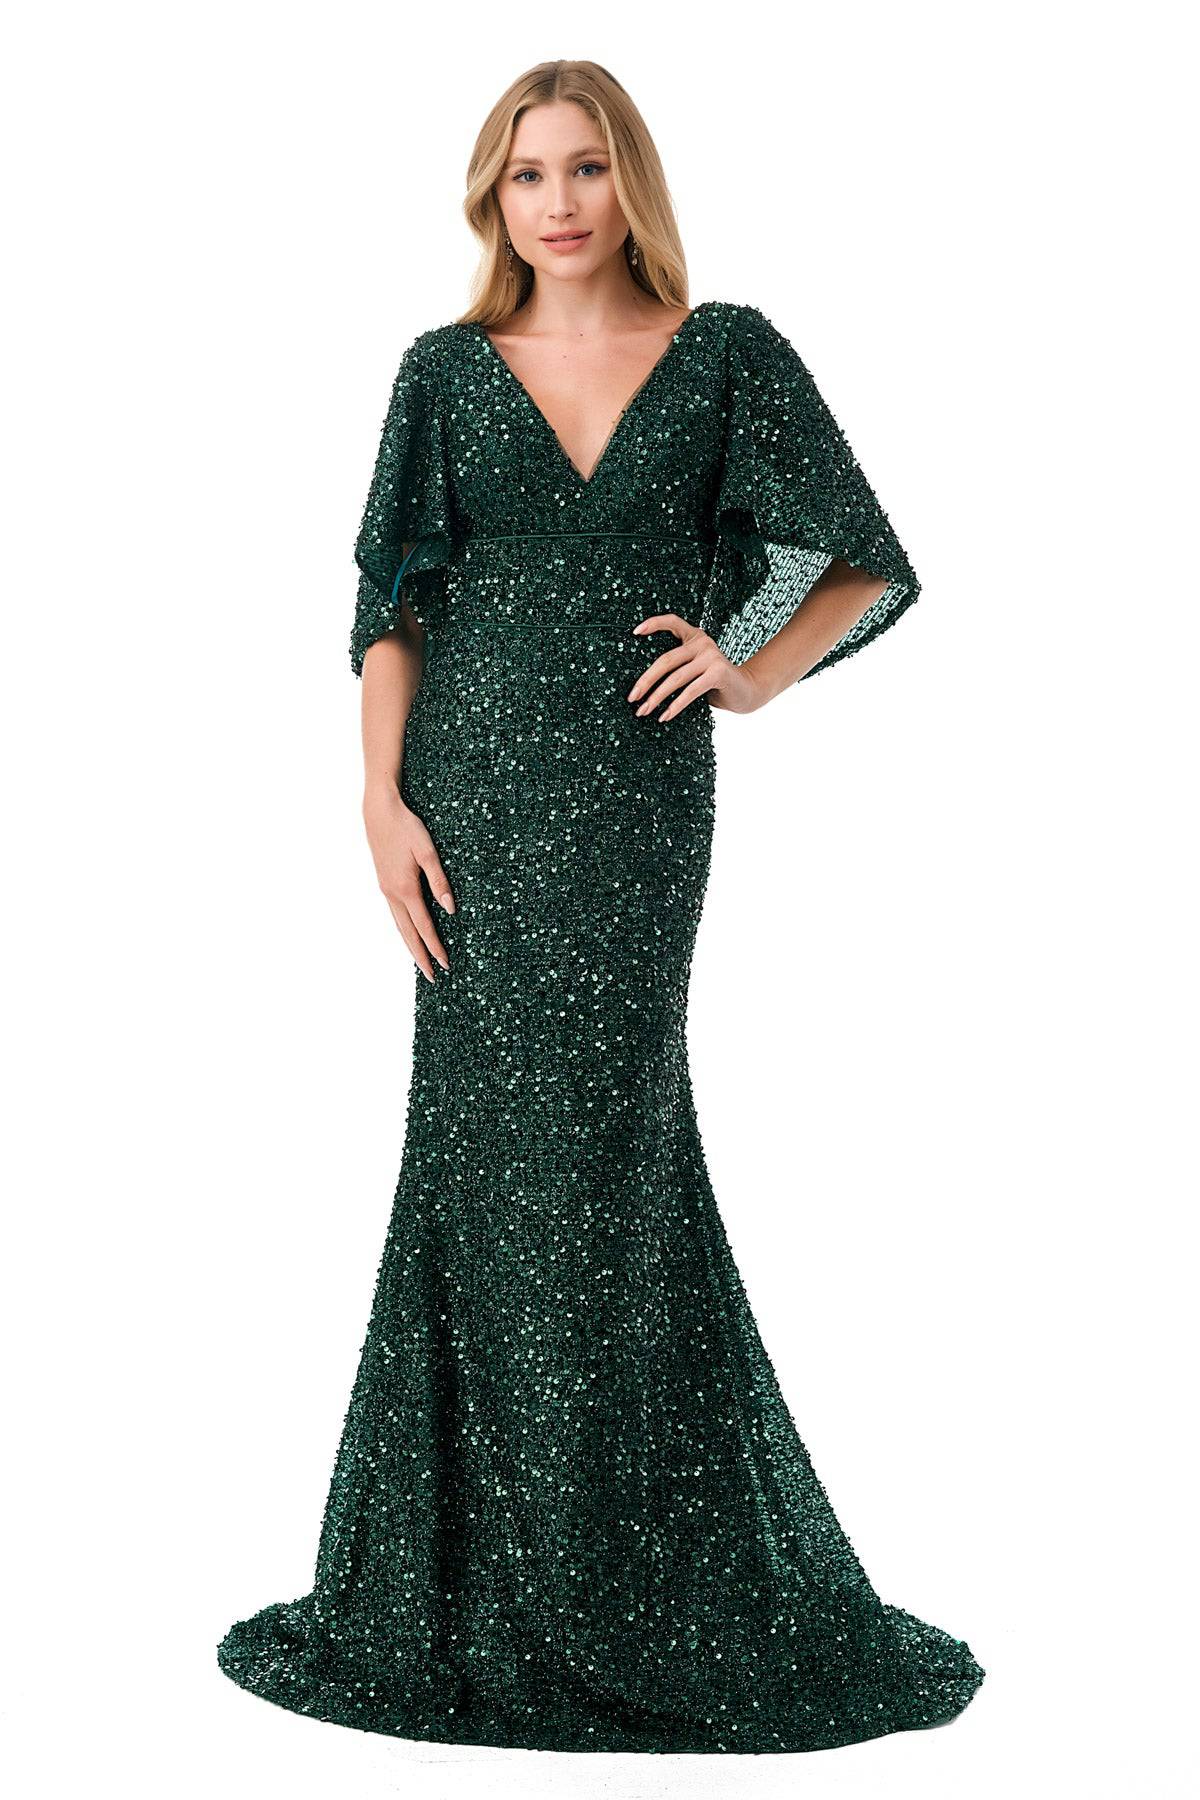 Aspeed M2751T Showstopping Emerald Sequin Flowing Sleeve Dress | 9 Colors - NORMA REED